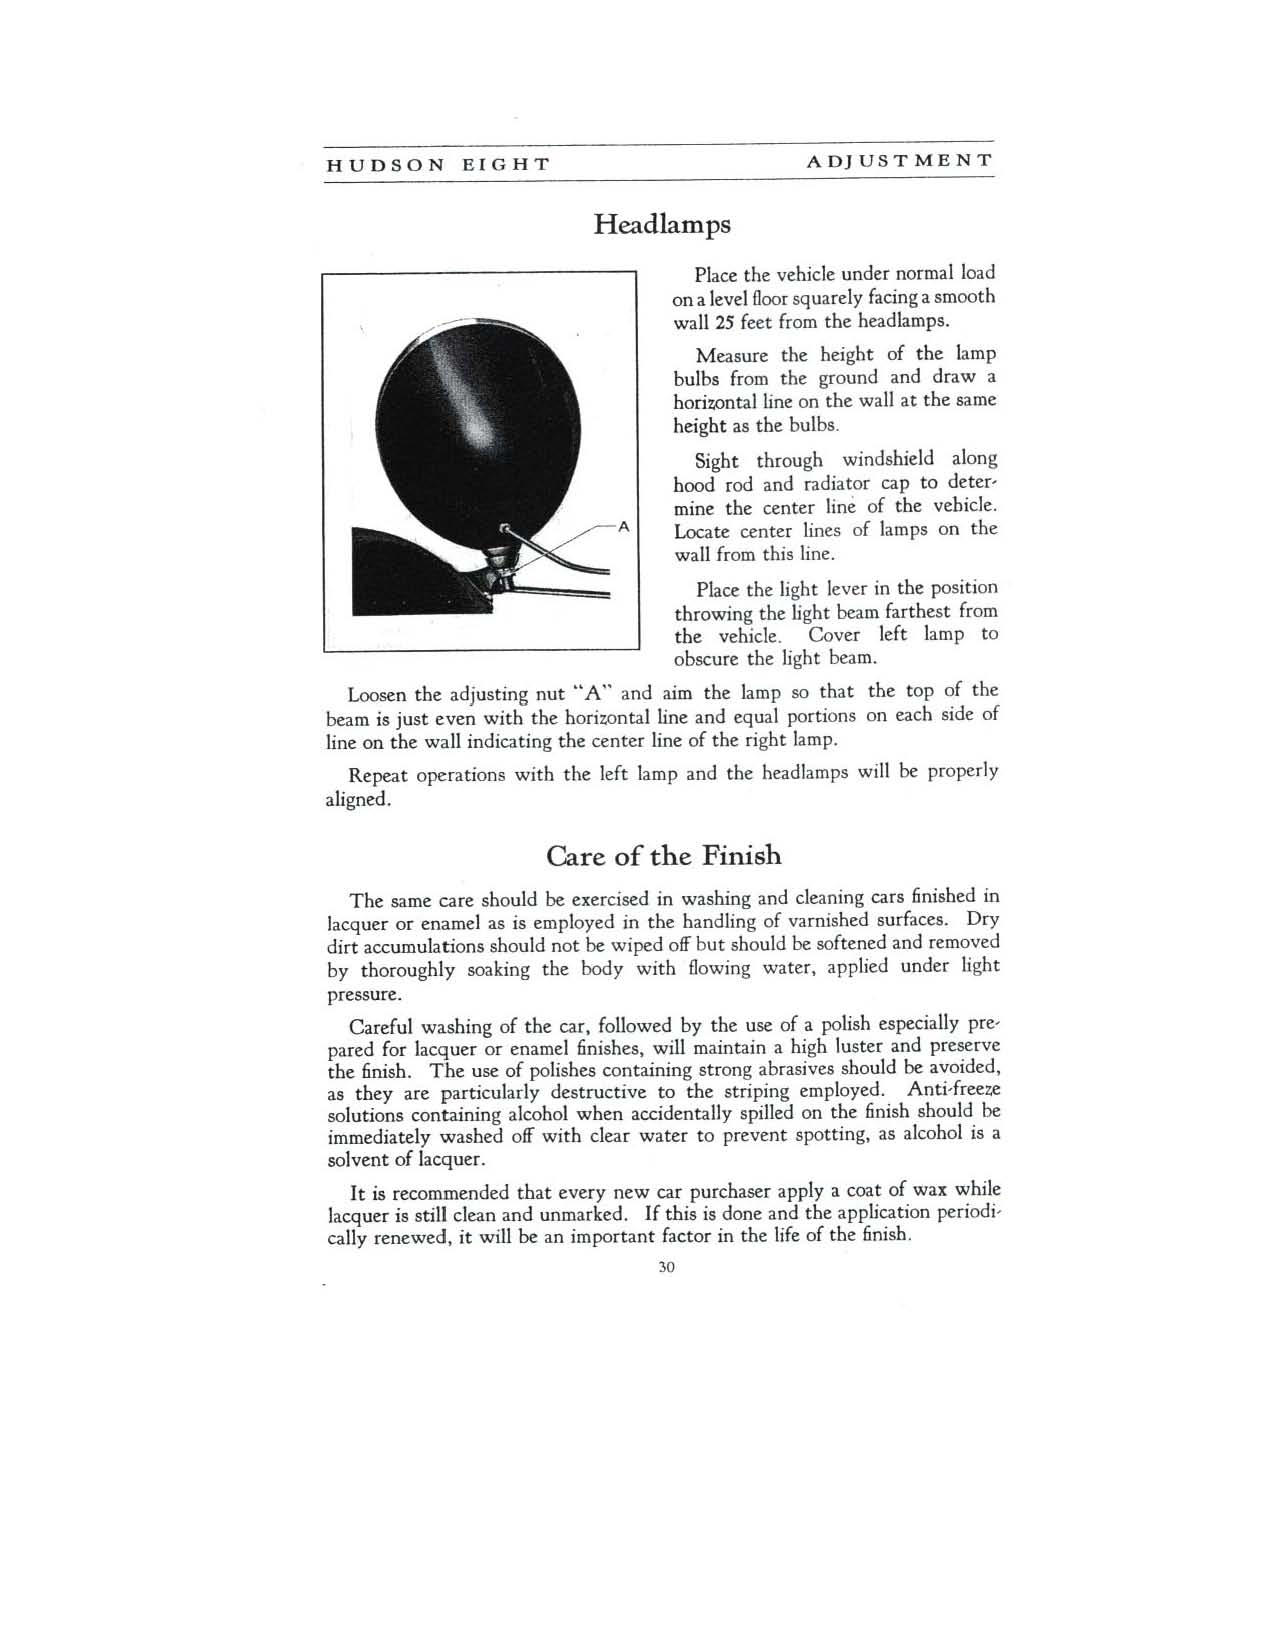 1931 Hudson 8 Instruction Book Page 27